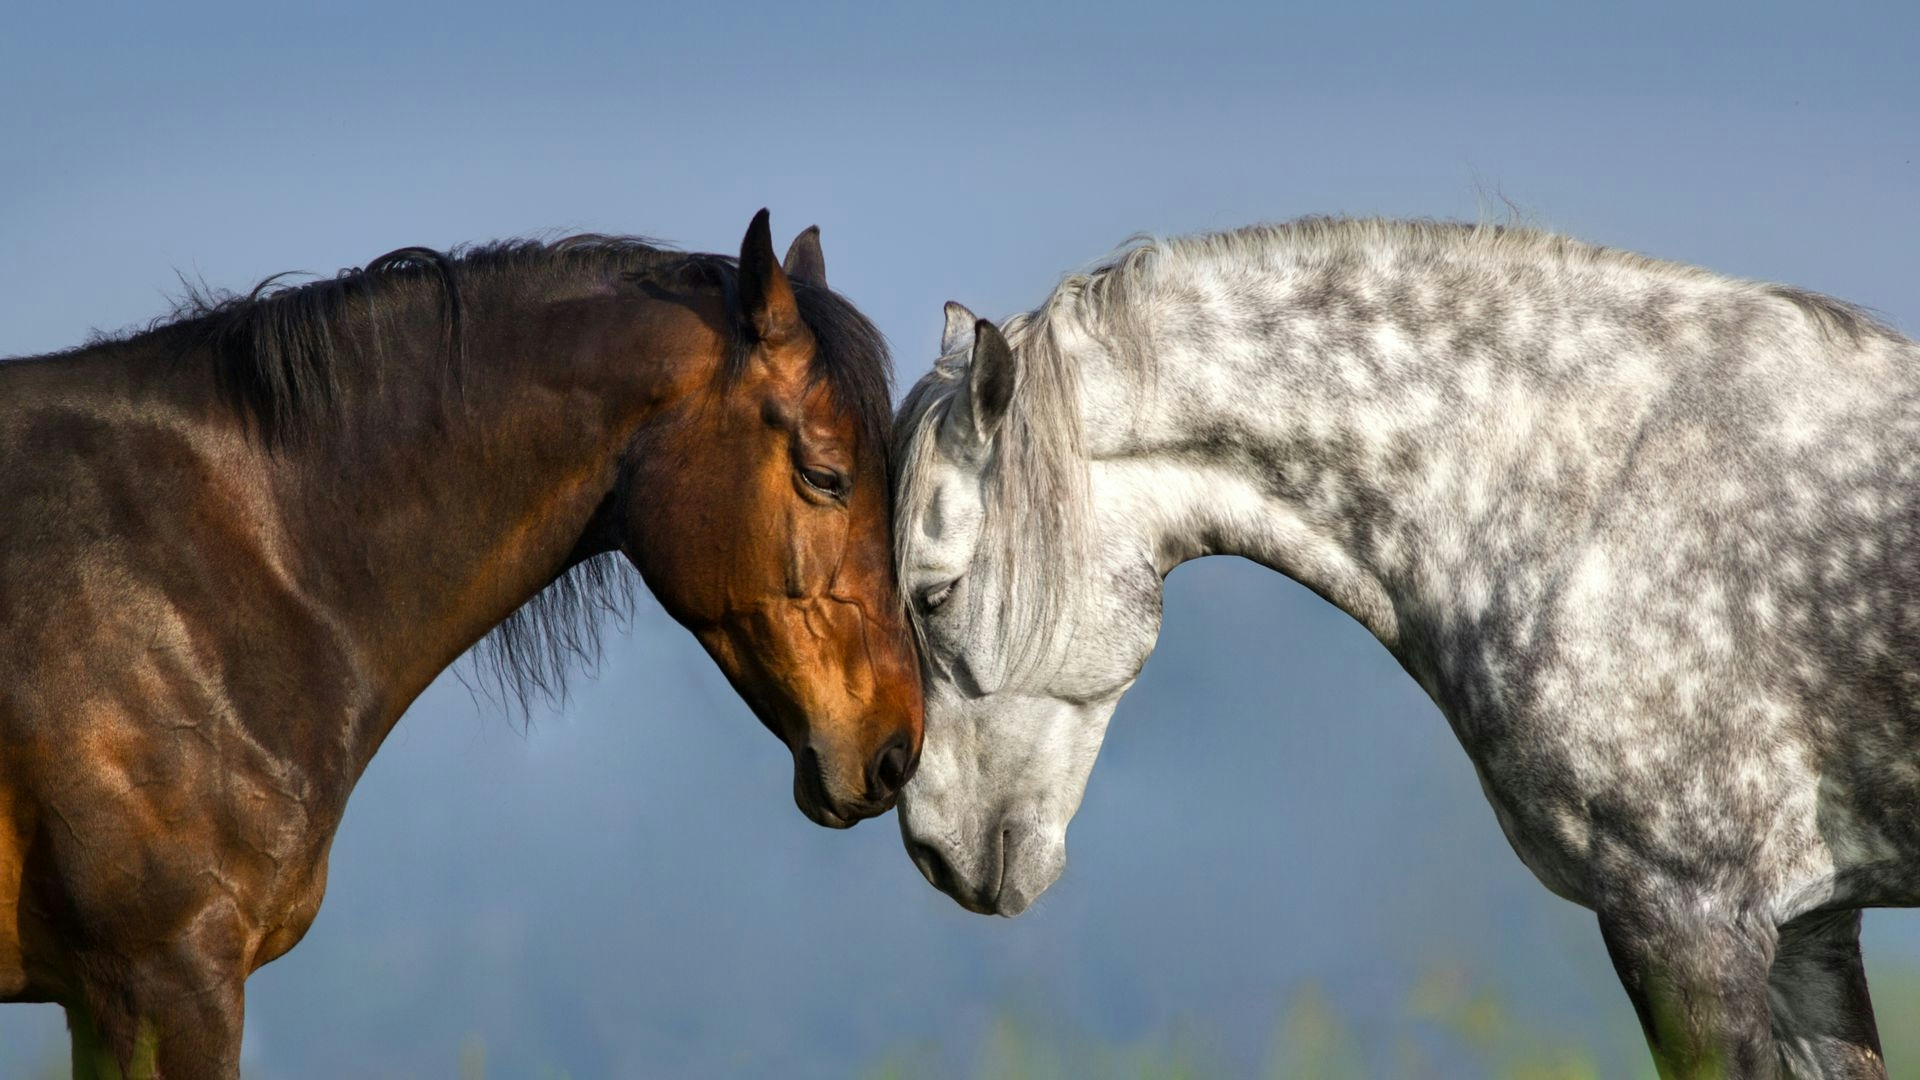 Abay and a grey horse touching heads